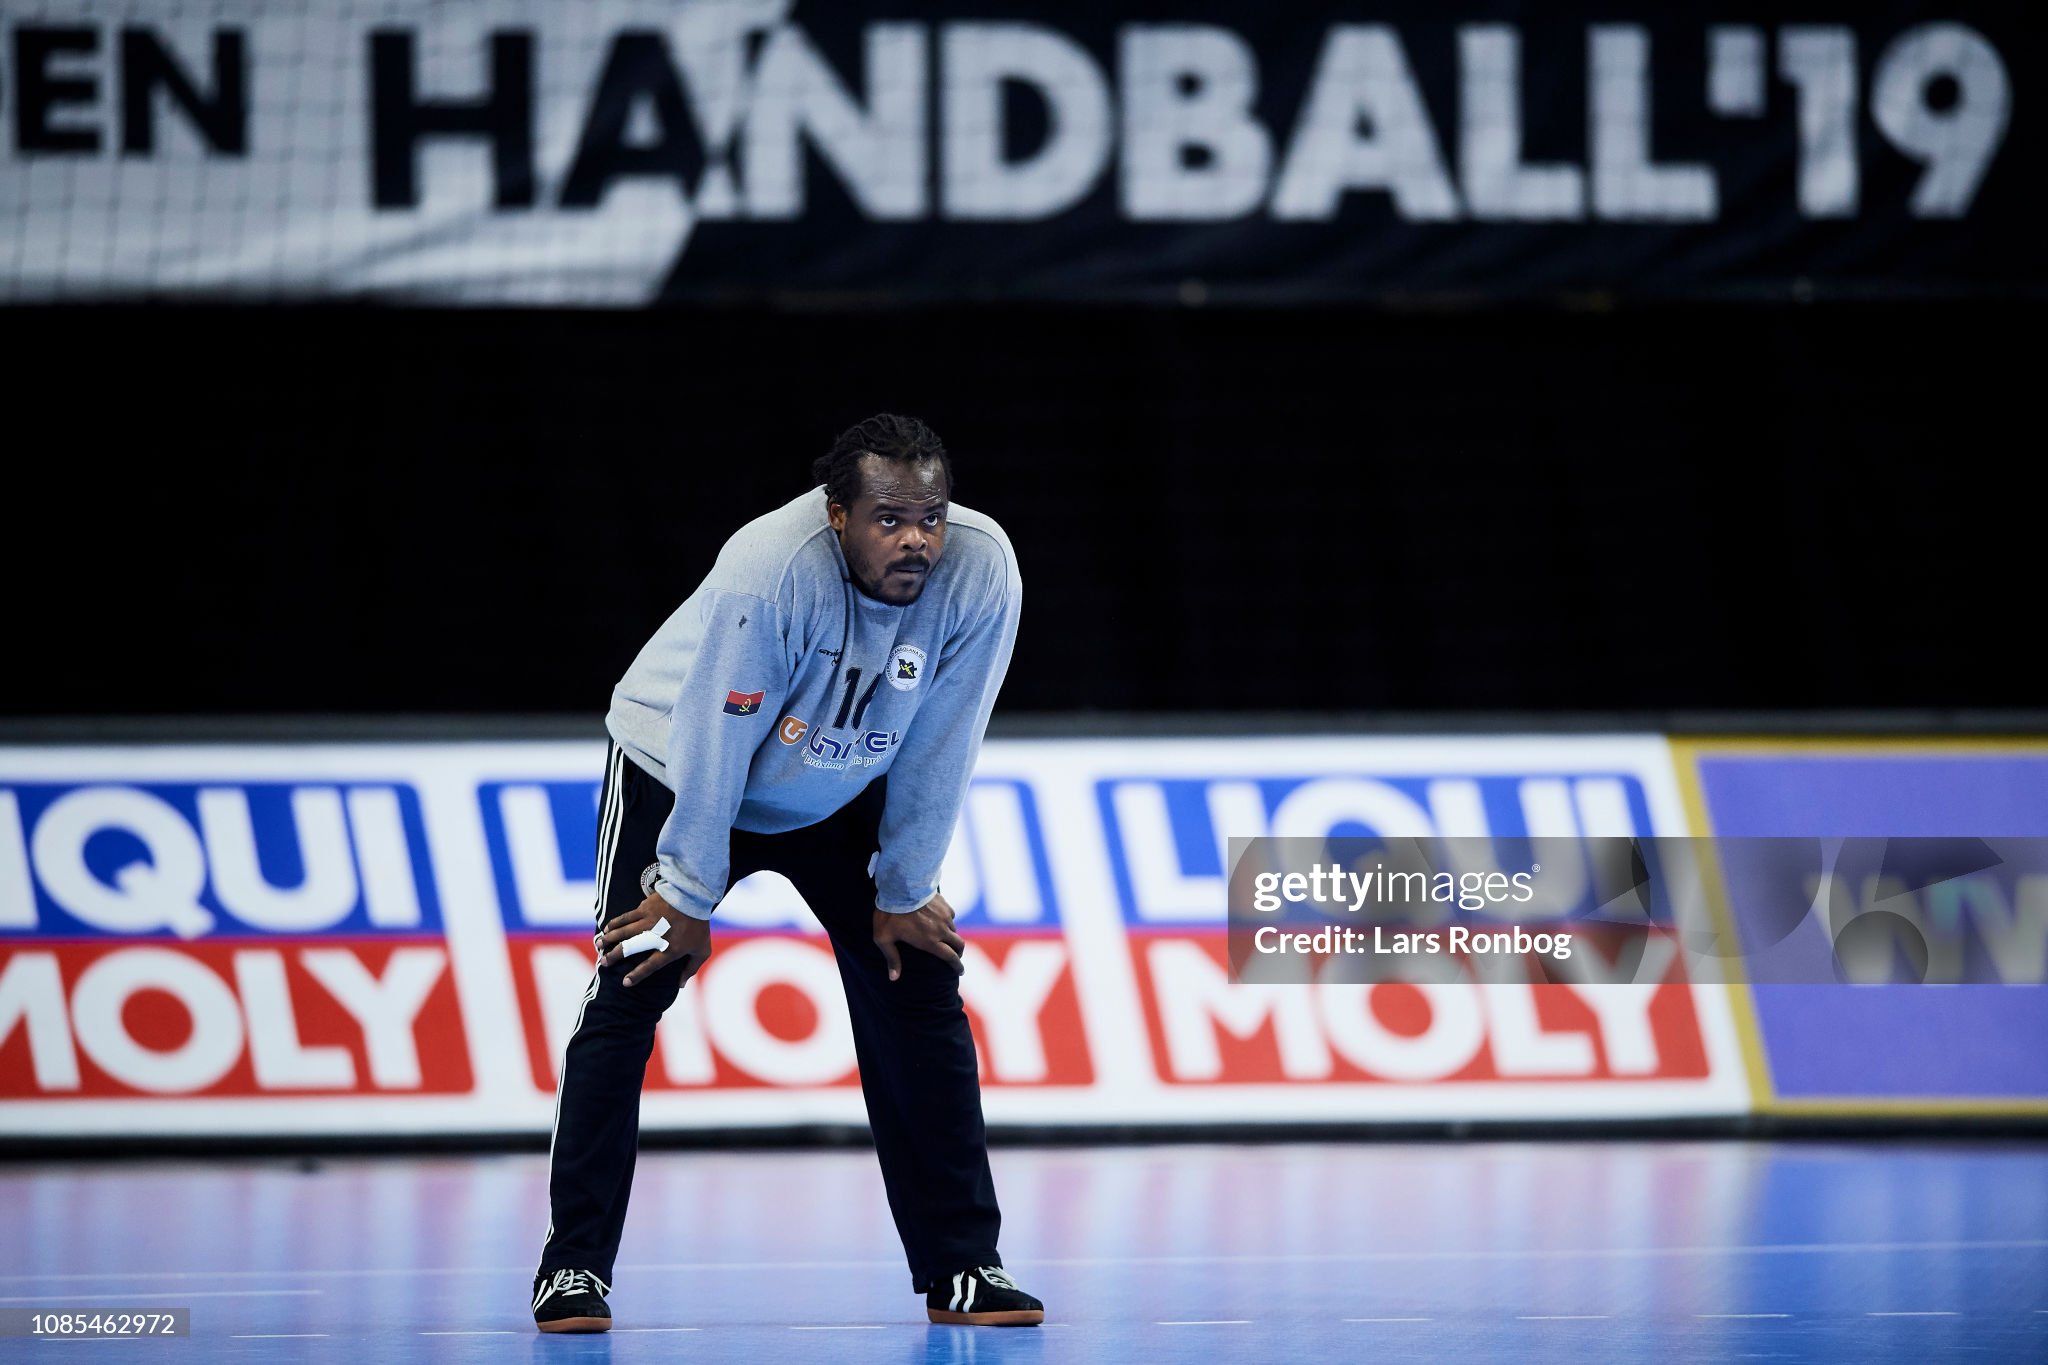 COPENHAGEN, DENMARK - JANUARY 20: Goalkeeper MUACHISSENGUE Giovany of Angola looks on during the IHF Men's Presidents Cup Handball match between Japan and Angola at Royal Arena on January 20, 2019 in Copenhagen, Denmark. (Photo by Lars Ronbog / FrontZoneSport via Getty Images)